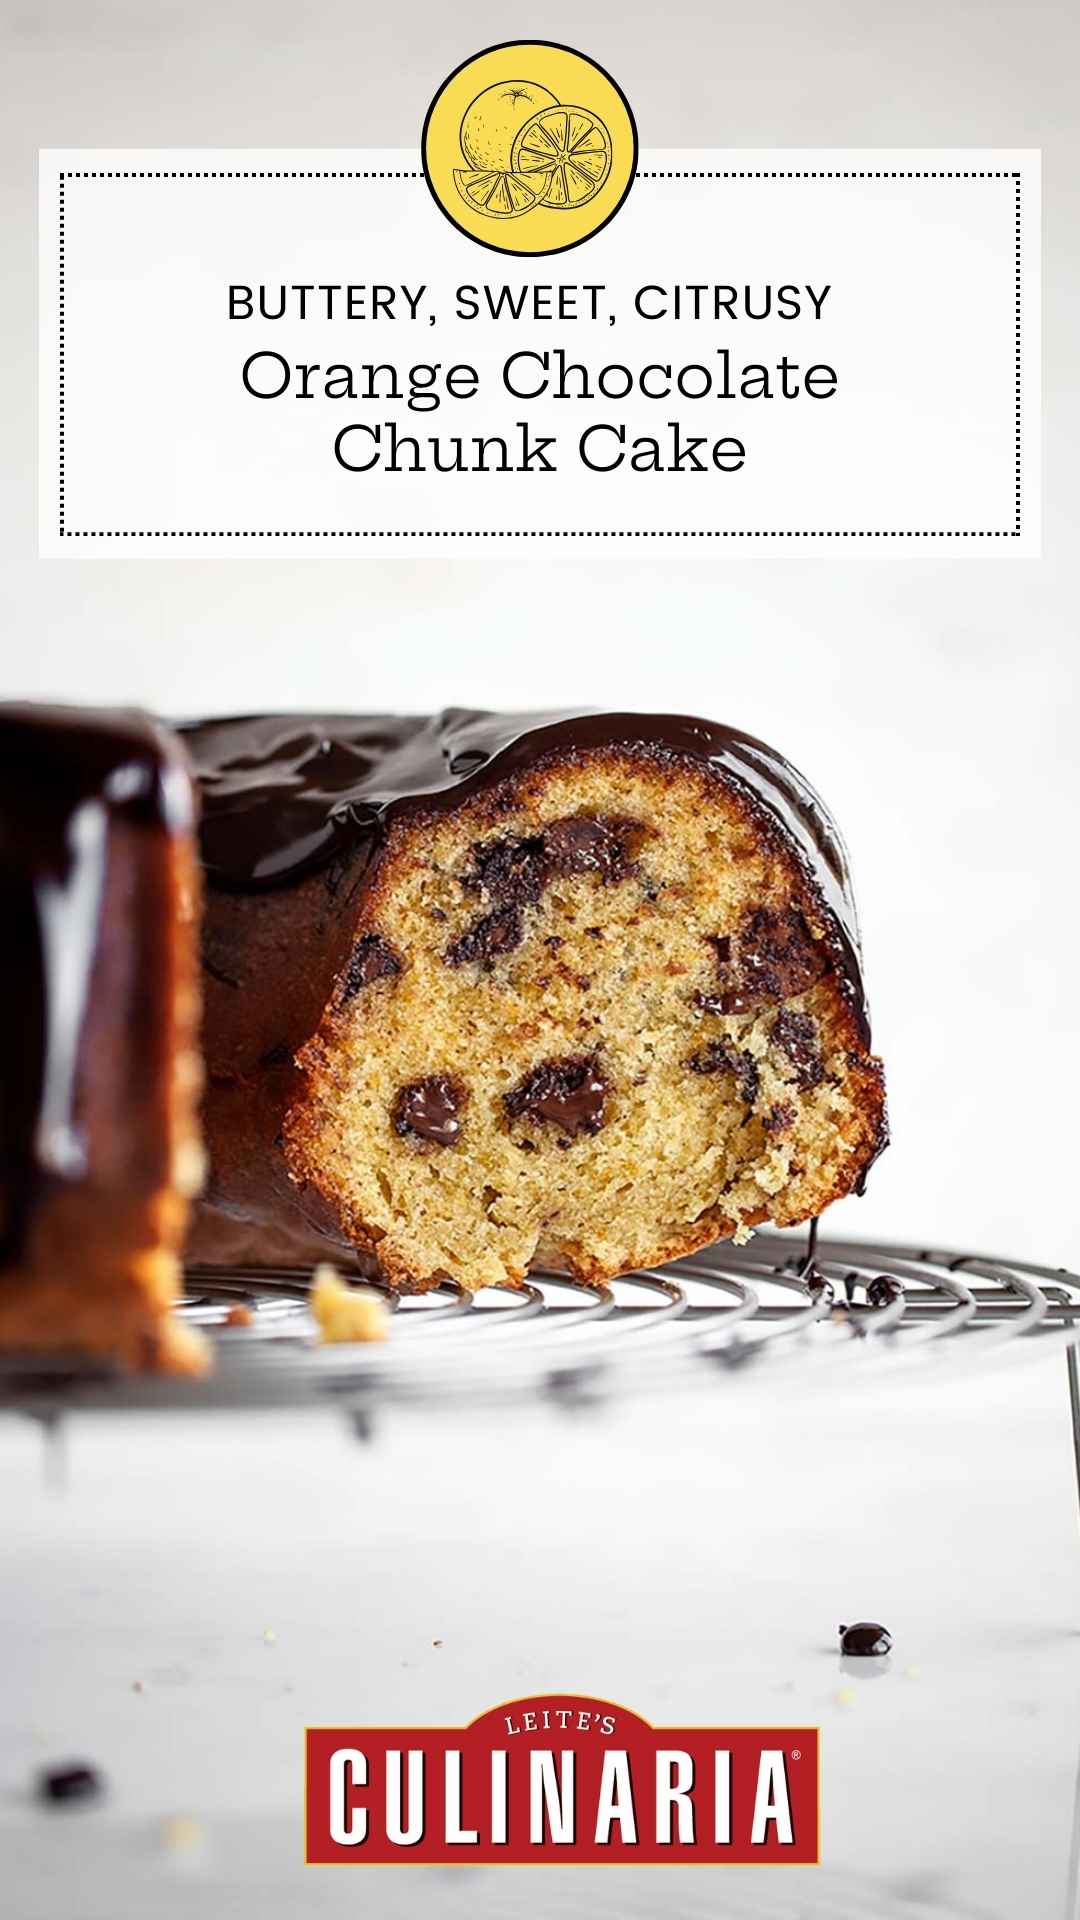 A partially cut orange chocolate chunk cake on a round wire rack.